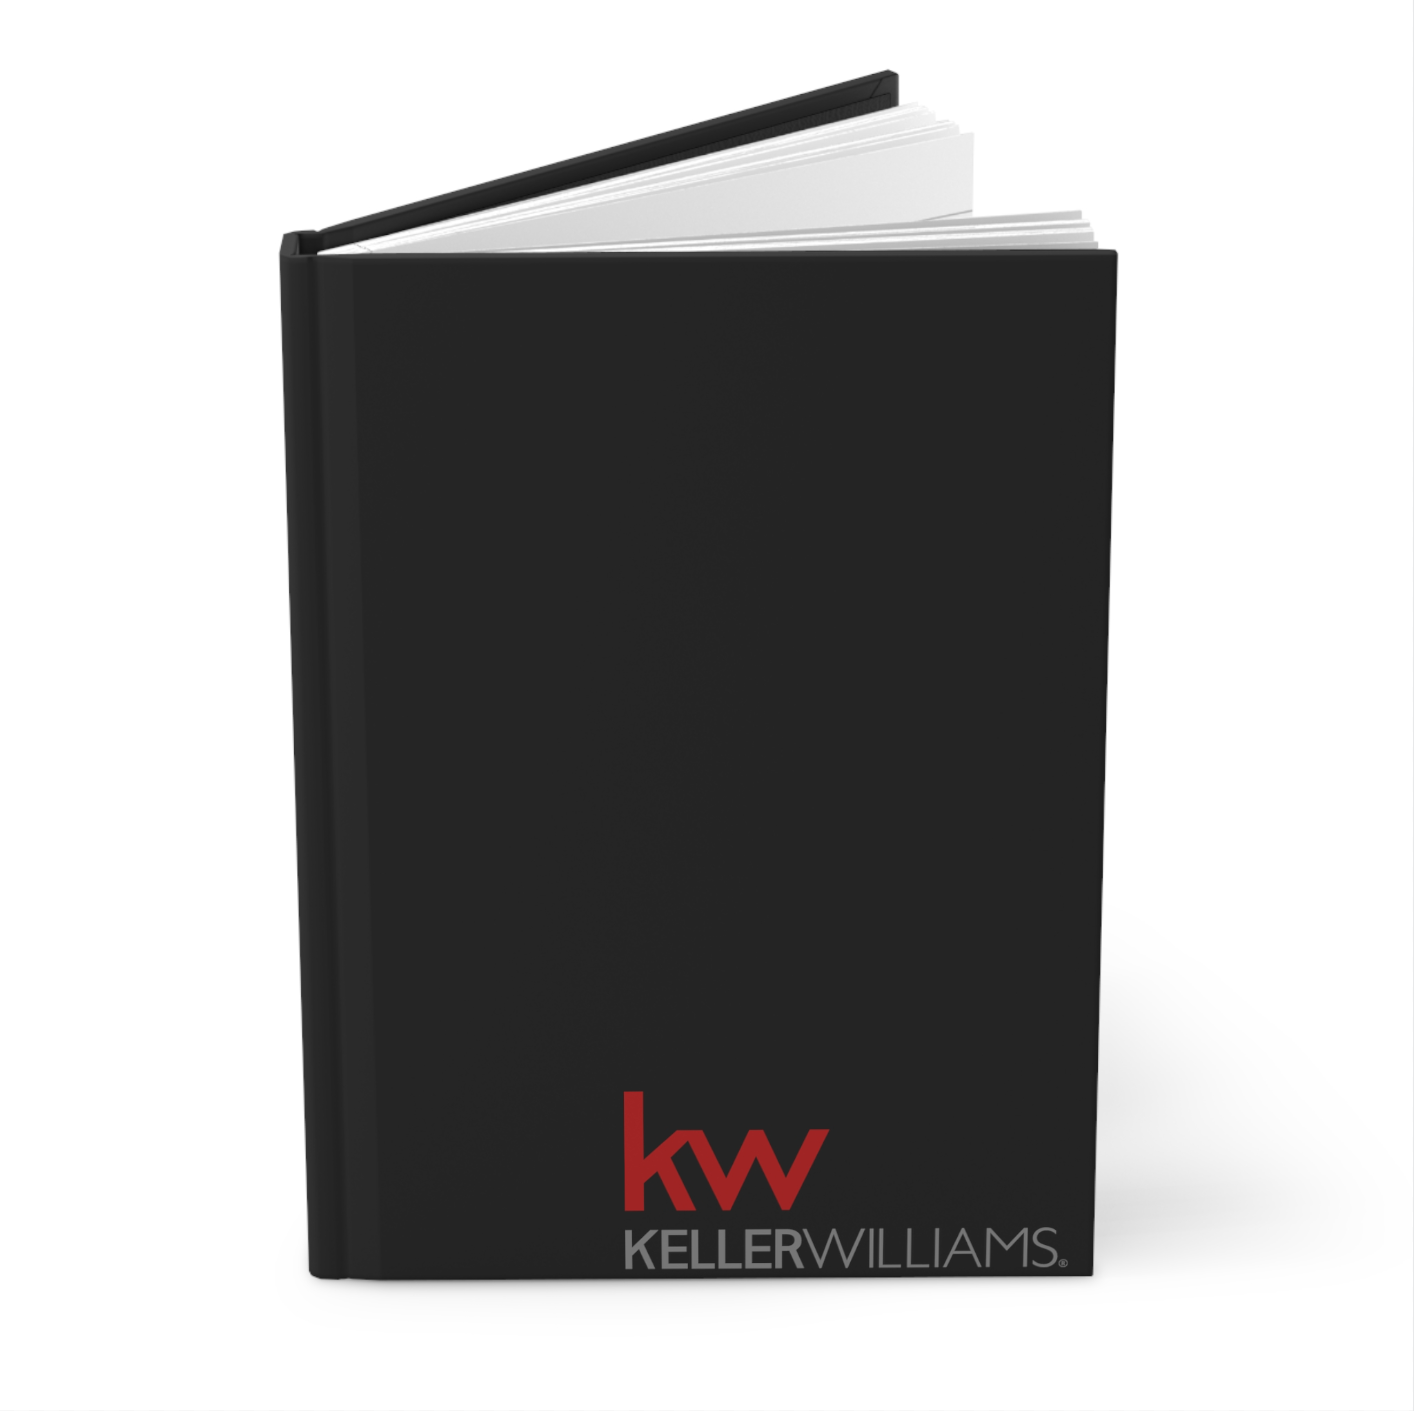 KW Full Color Hardcover Binders Black KW Wordmark (from as low as $10.46 per cover)